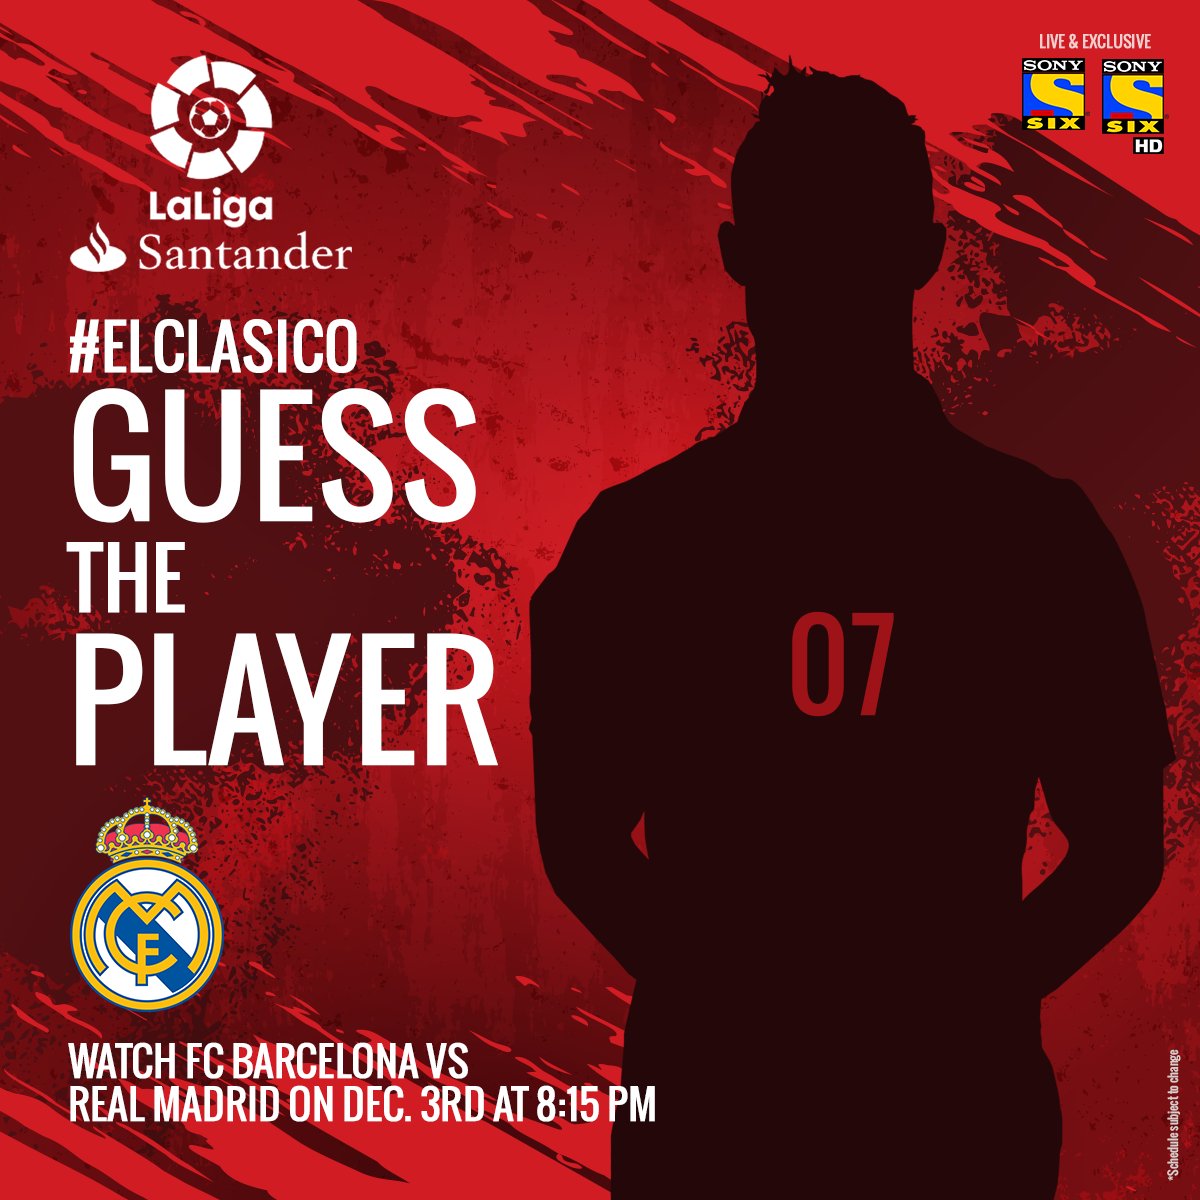 Sony Sports on Twitter: "Can you guess player and his jersey number? Watch @FCBarcelona vs @realmadrid in the #ElClasico on Saturday, December 3rd at 8:15 PM! / Twitter